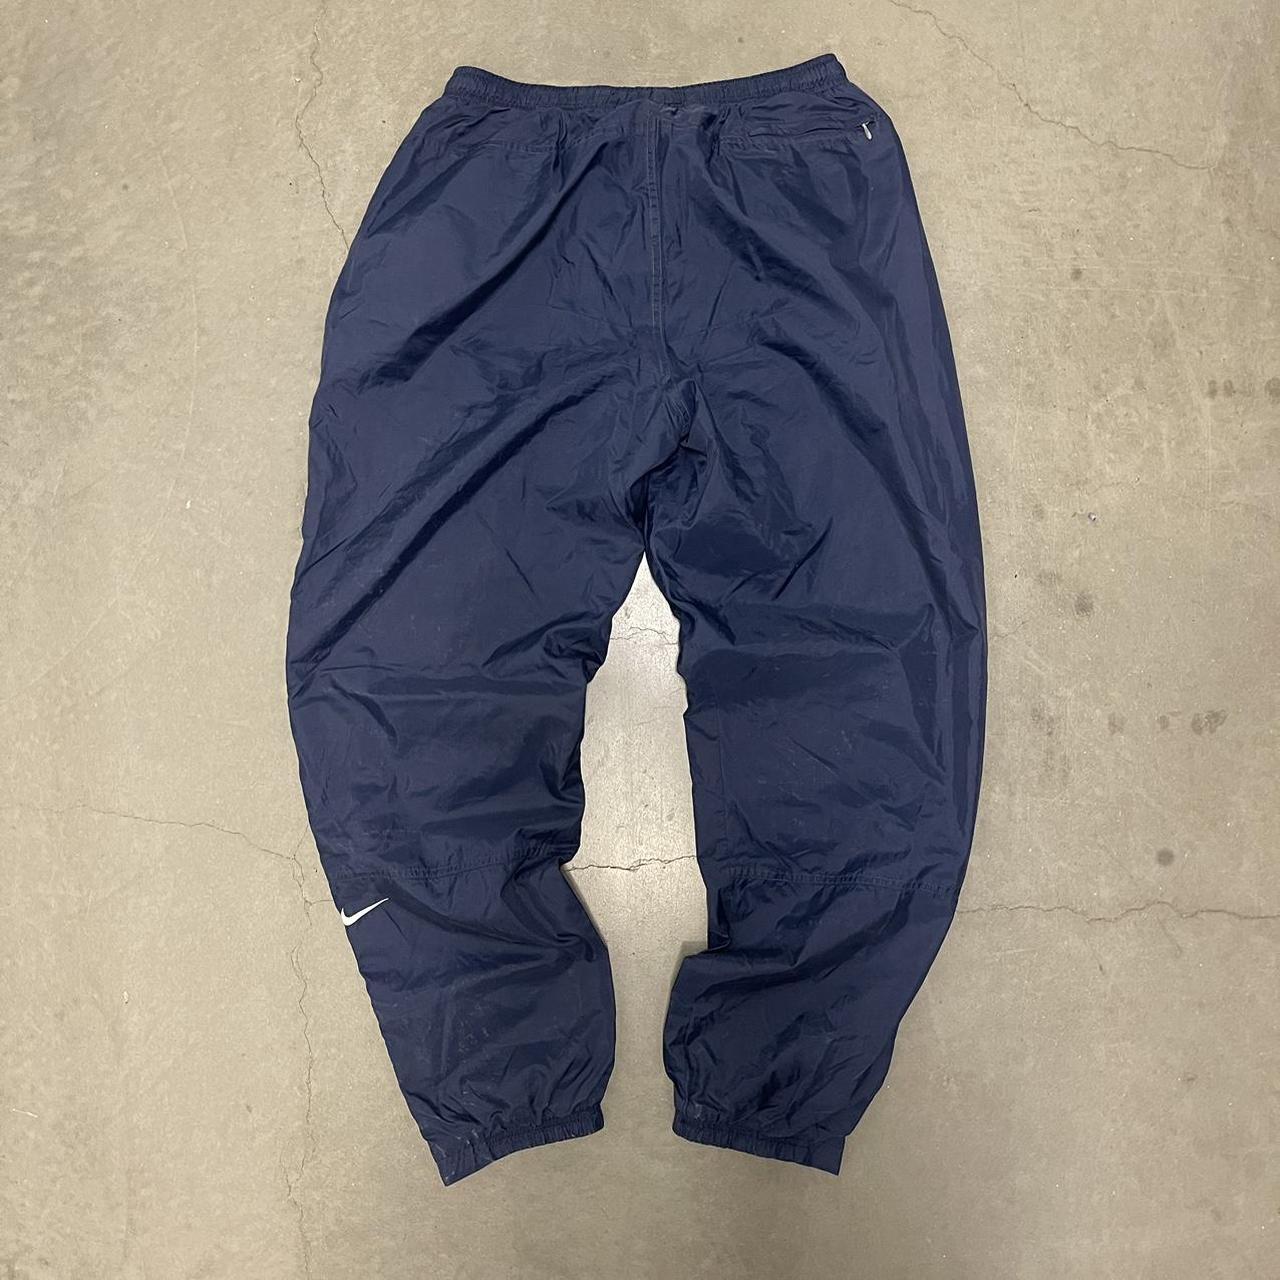 90s/early 2000s nike track pants with zip up ankles - Depop